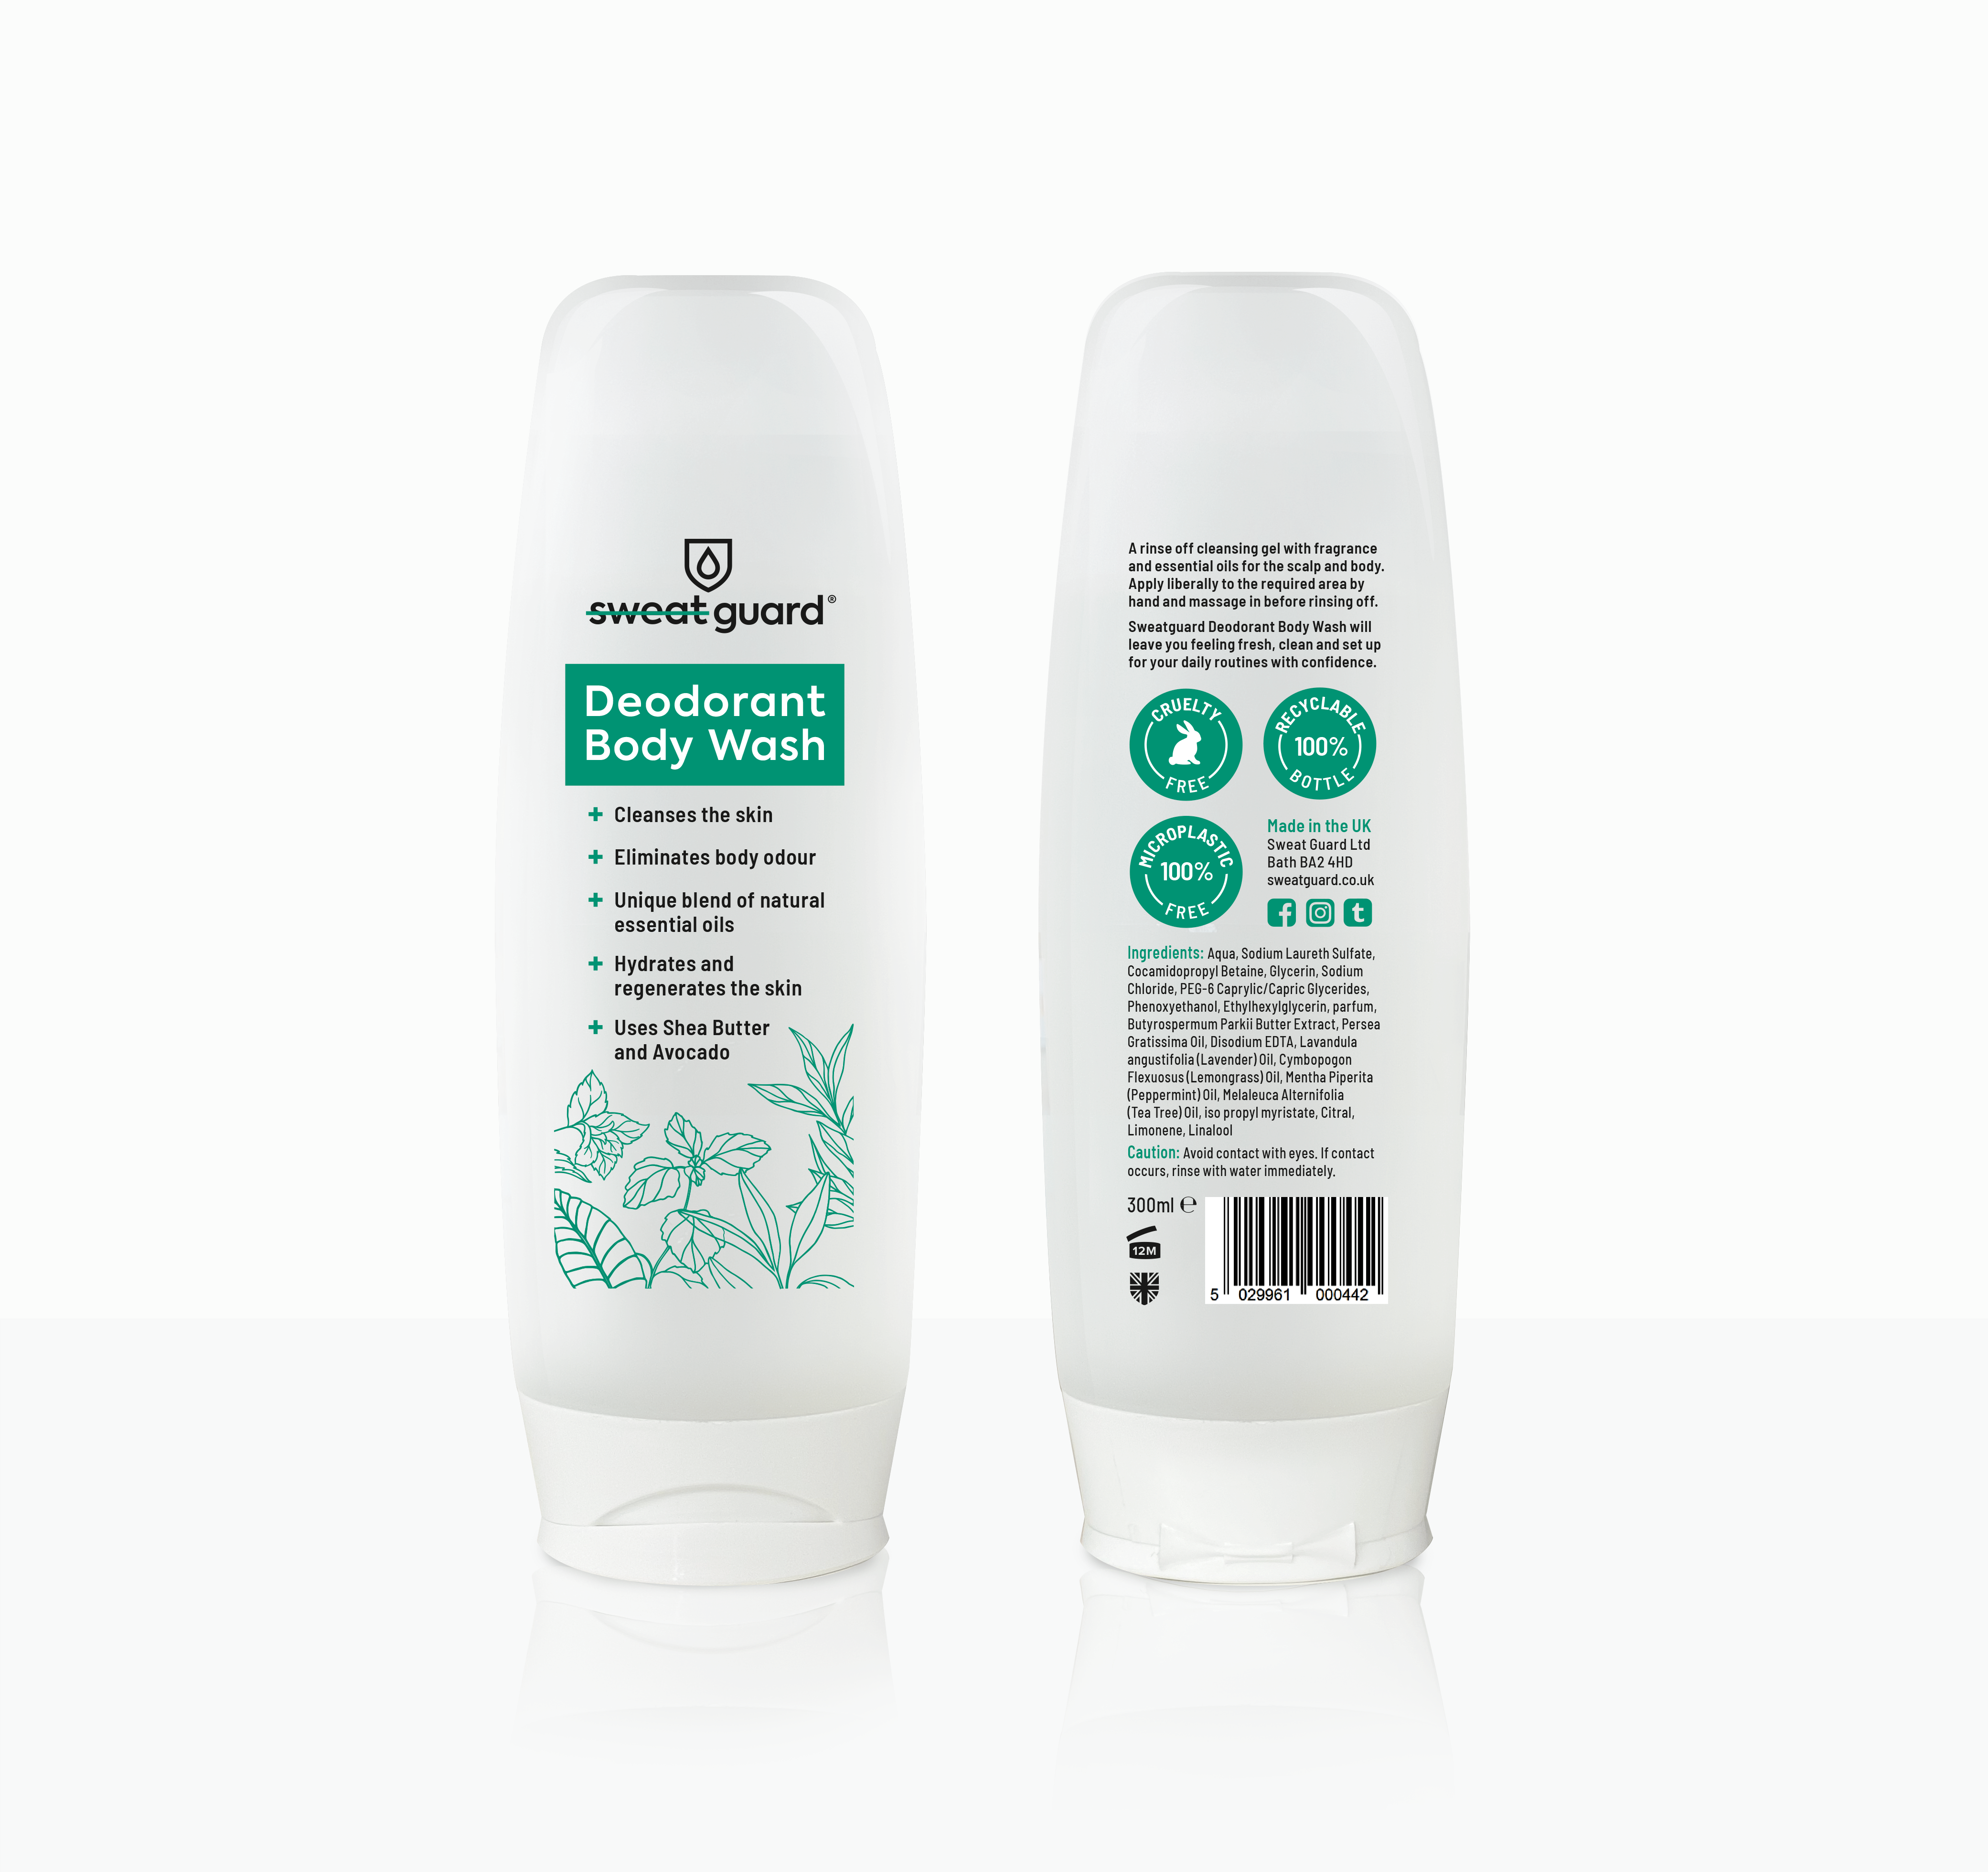 Discover the heavenly scent of natural oils with SWEAT GUARD® Deodorant Body Wash!